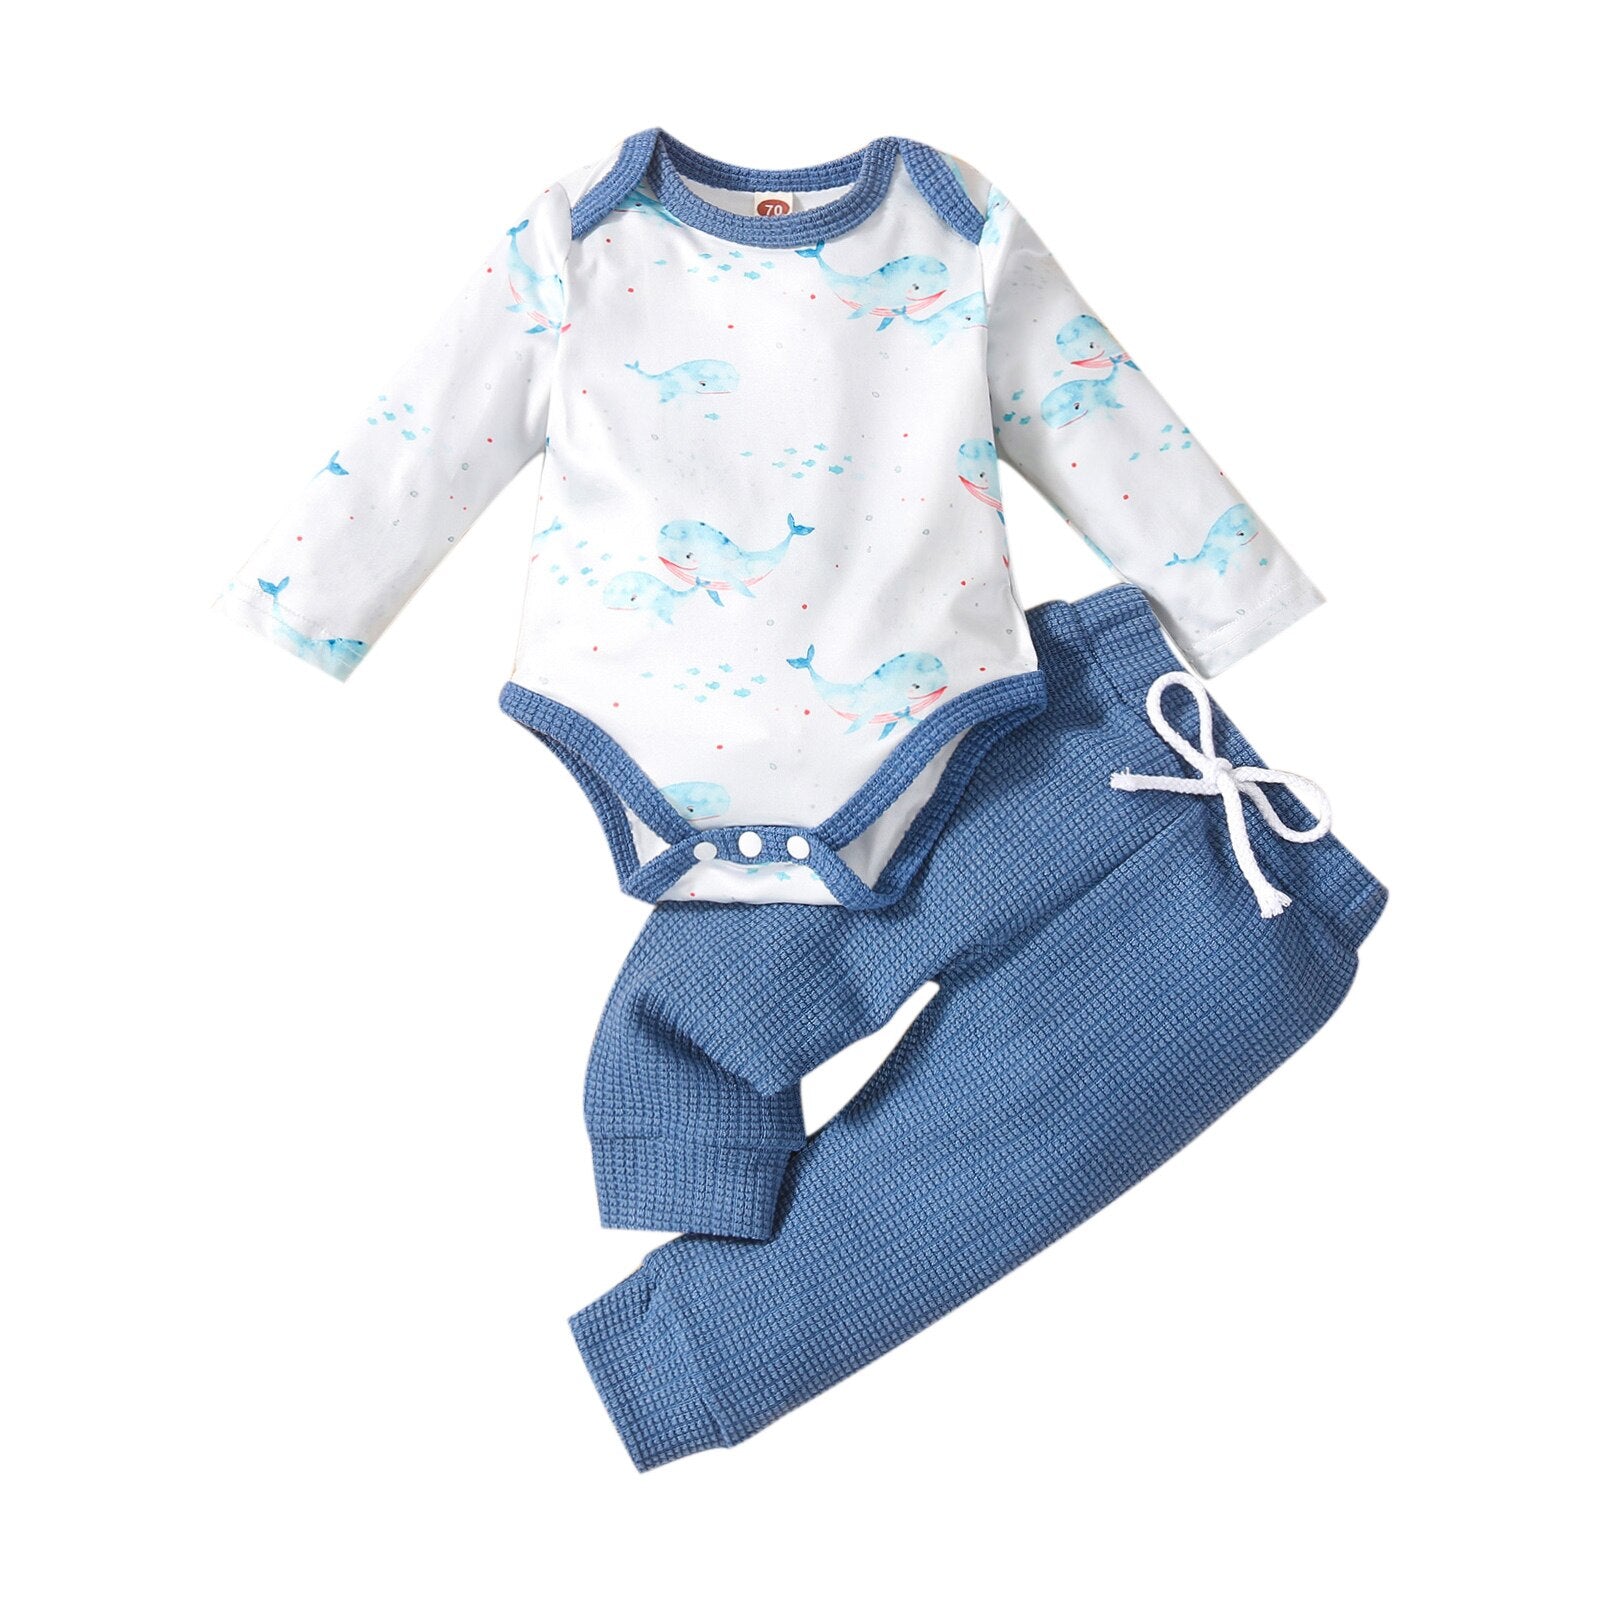 Adorable Autumn Whale Print Baby Clothes Set for Your Little One